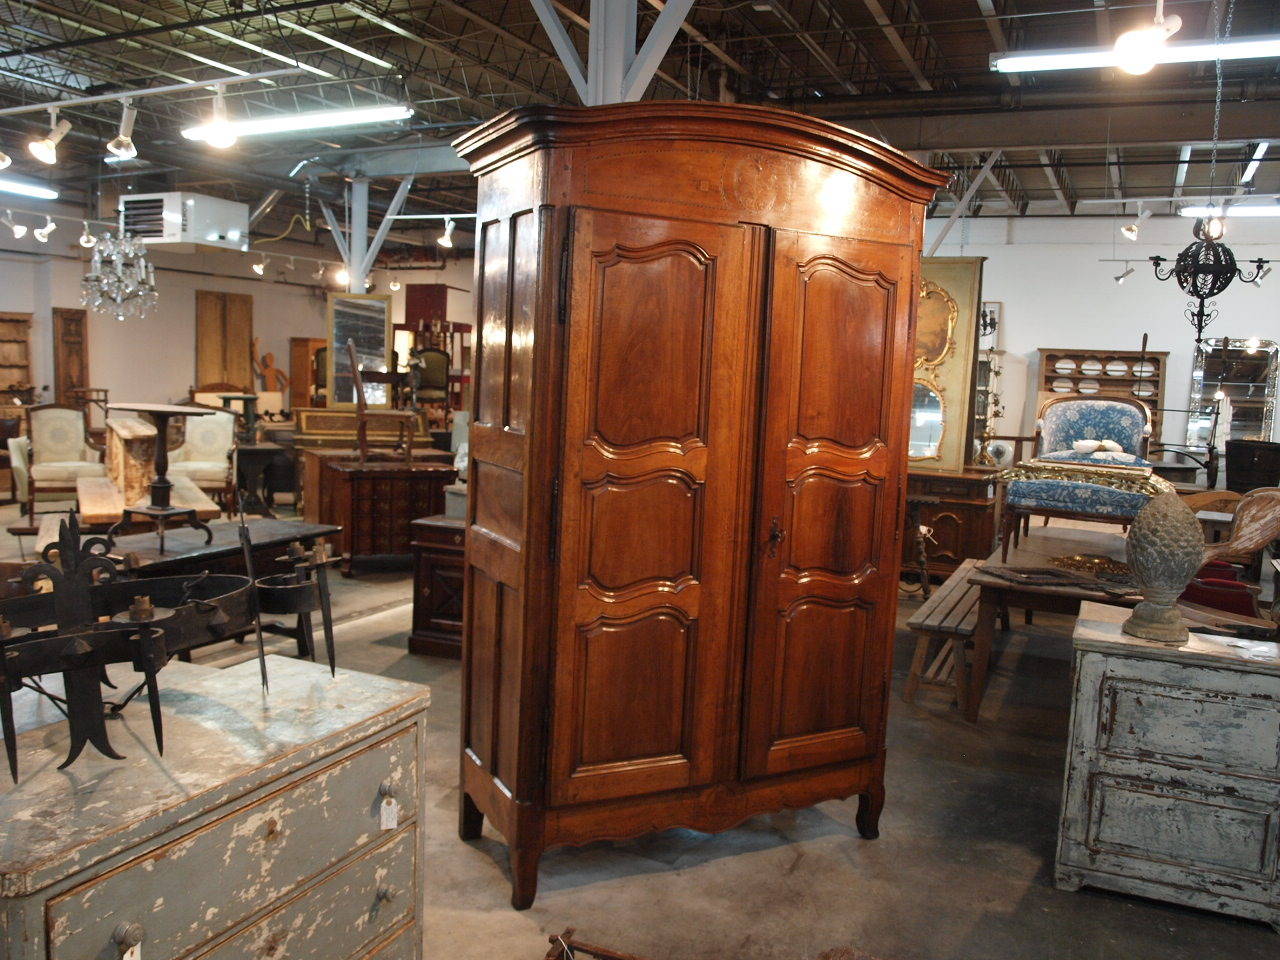 A stately late 18th century French Louis XV armoire in walnut. This very handsome armoire has touches of marquetry detailing to the front, above and below the door panels. The patina is very rich and luminous with wonderful grain patterns. A